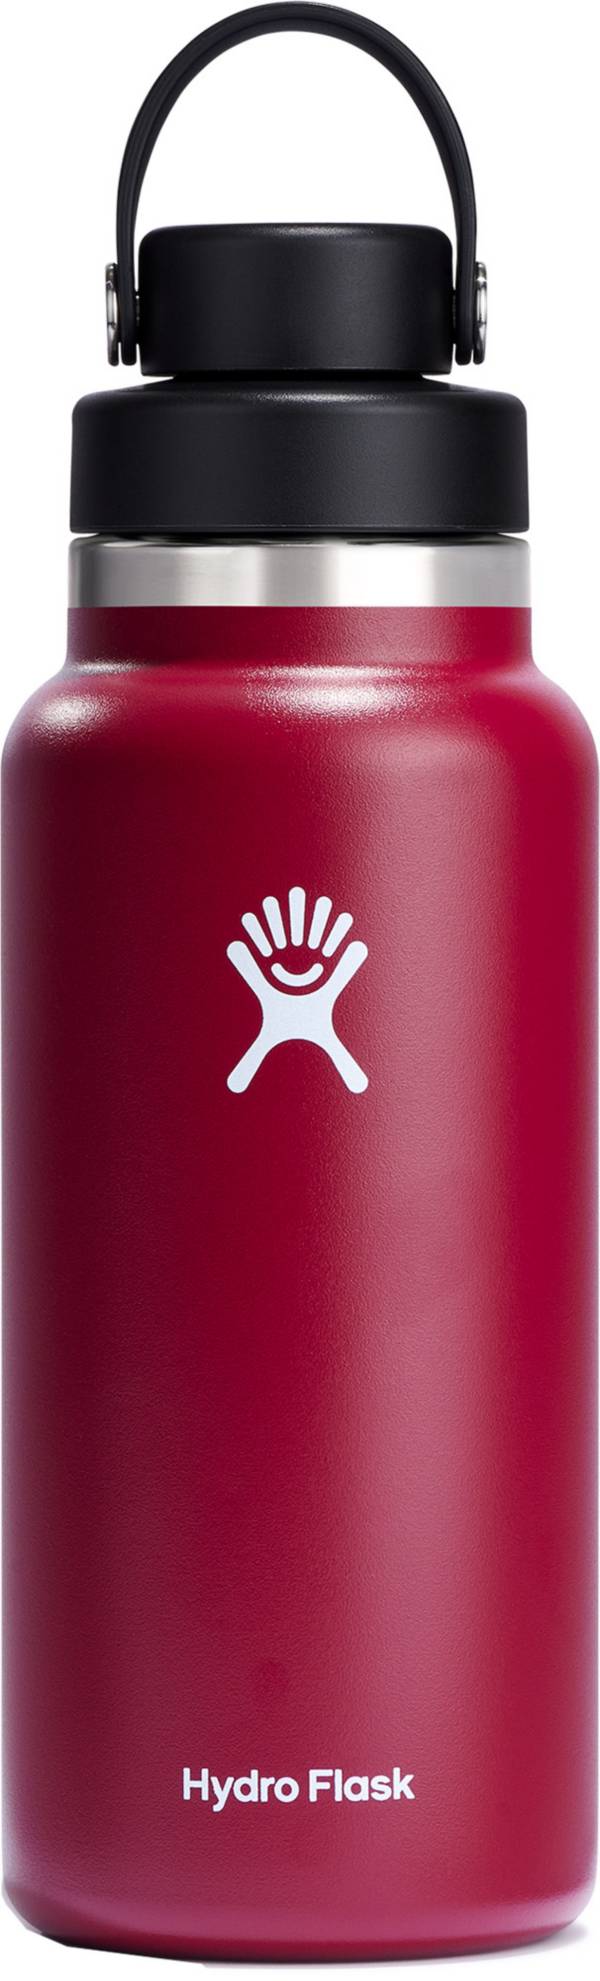 Hydro Flask 32 oz. Wide Mouth Bottle with Flex Chug Cap product image